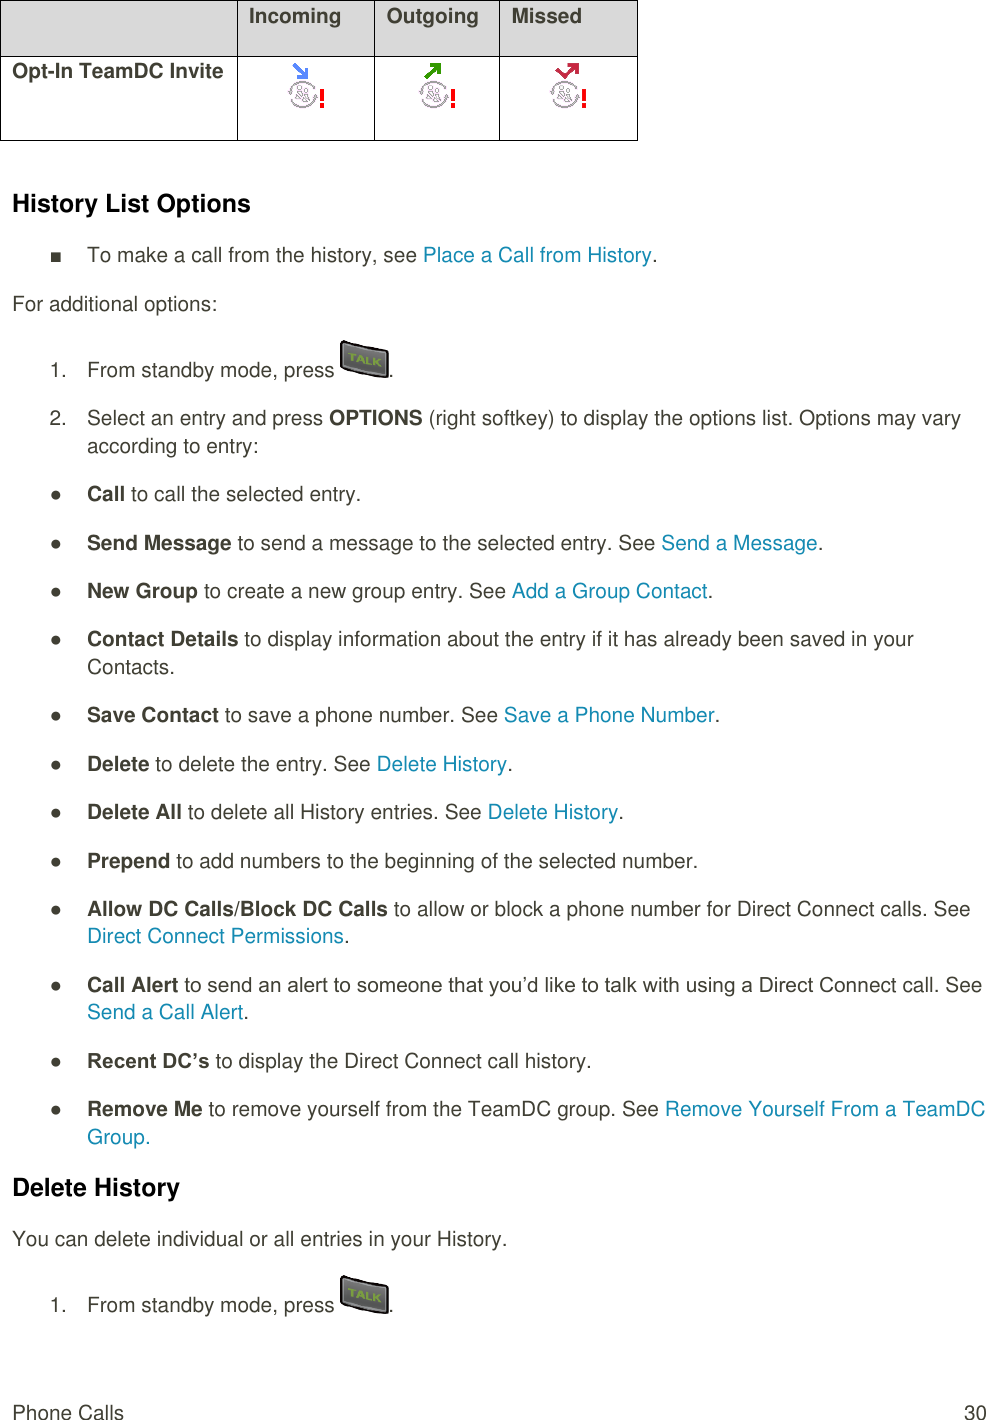  Phone Calls  30  Incoming Outgoing Missed Opt-In TeamDC Invite     History List Options ■  To make a call from the history, see Place a Call from History. For additional options: 1.  From standby mode, press  . 2.  Select an entry and press OPTIONS (right softkey) to display the options list. Options may vary according to entry: ● Call to call the selected entry. ● Send Message to send a message to the selected entry. See Send a Message. ● New Group to create a new group entry. See Add a Group Contact. ● Contact Details to display information about the entry if it has already been saved in your Contacts. ● Save Contact to save a phone number. See Save a Phone Number. ● Delete to delete the entry. See Delete History. ● Delete All to delete all History entries. See Delete History. ● Prepend to add numbers to the beginning of the selected number. ● Allow DC Calls/Block DC Calls to allow or block a phone number for Direct Connect calls. See Direct Connect Permissions. ● Call Alert to send an alert to someone that you’d like to talk with using a Direct Connect call. See Send a Call Alert.  ● Recent DC’s to display the Direct Connect call history. ● Remove Me to remove yourself from the TeamDC group. See Remove Yourself From a TeamDC Group.  Delete History You can delete individual or all entries in your History. 1.  From standby mode, press  . 